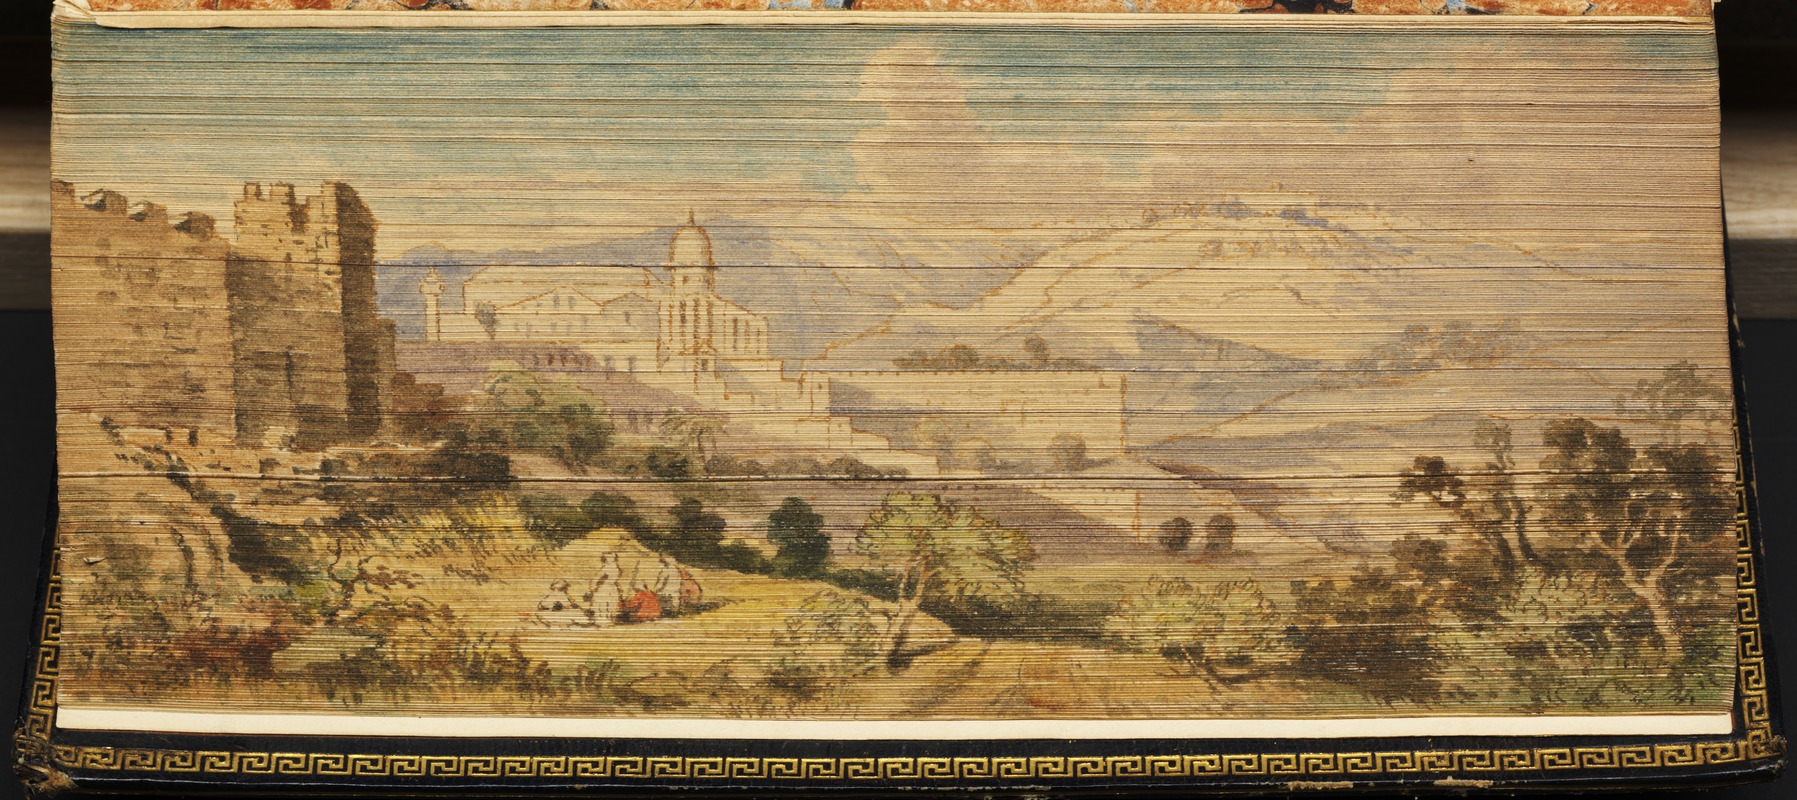 Mount of Olives from the slopes of Zion